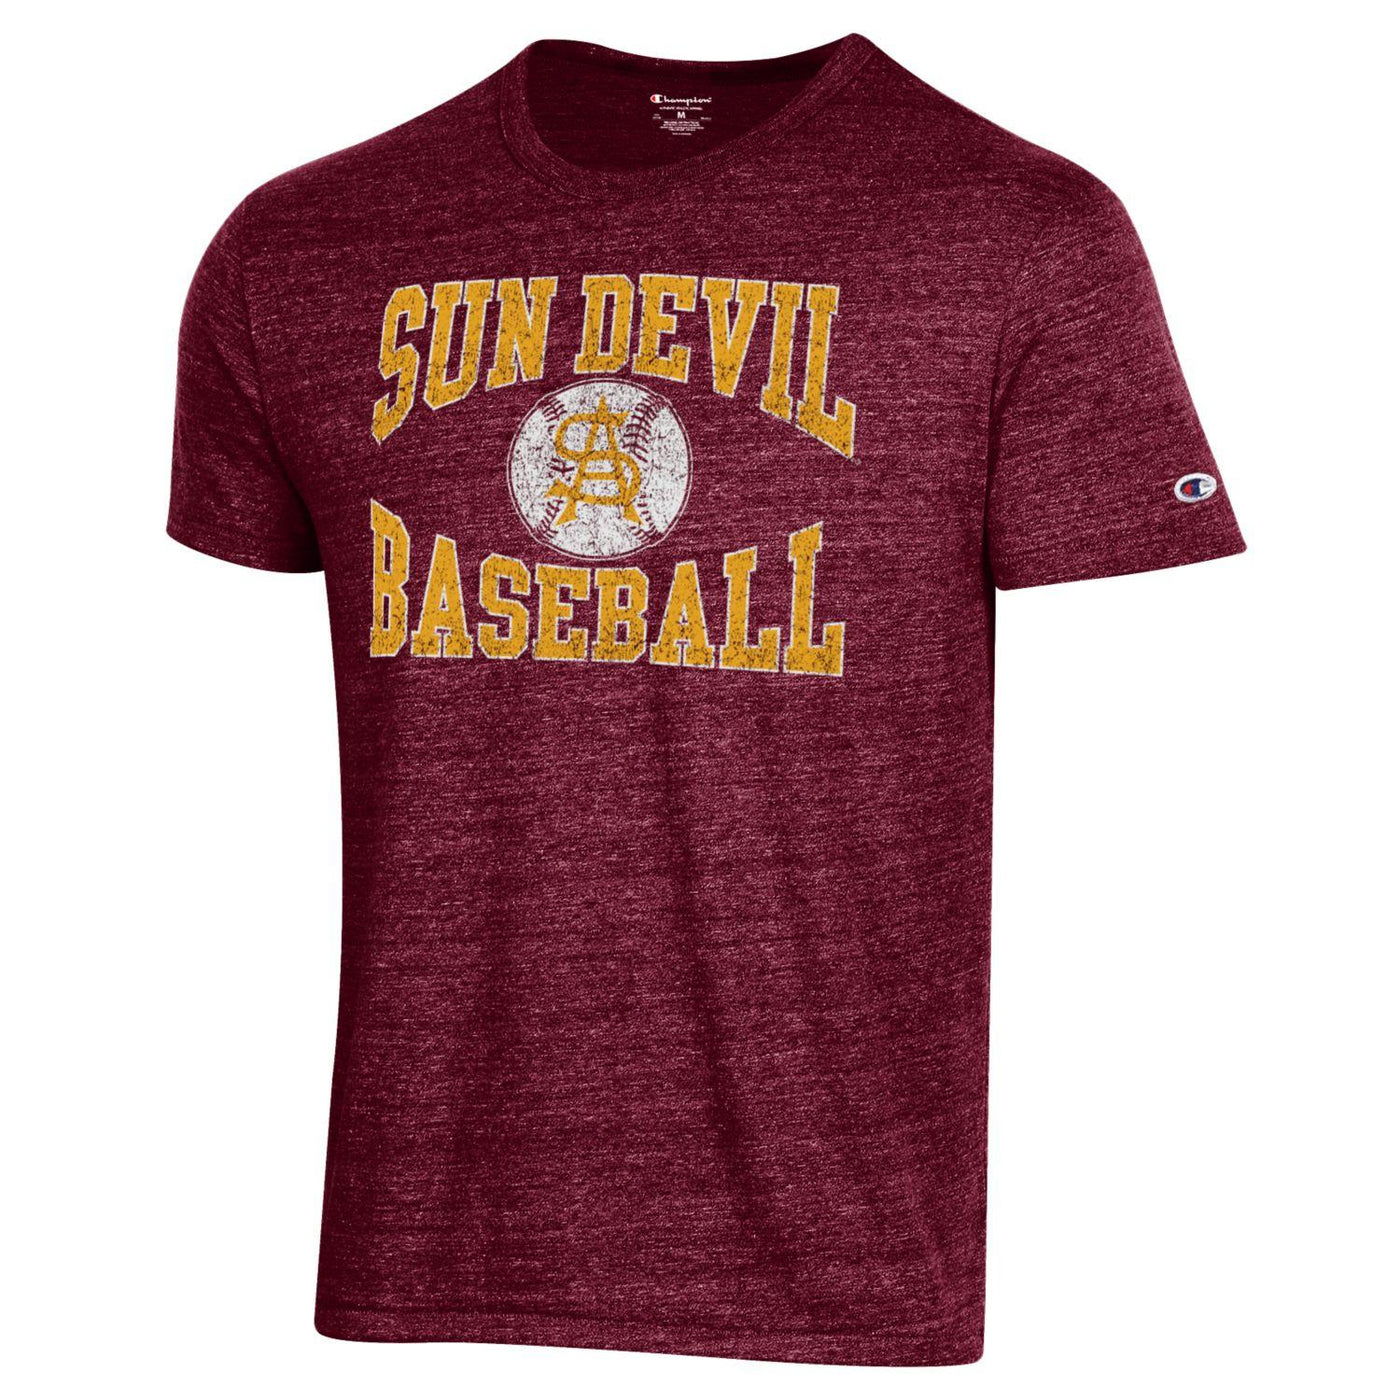 ASU tee in heather maroon that says 'Sun Devil Baseball' with a baseball on front